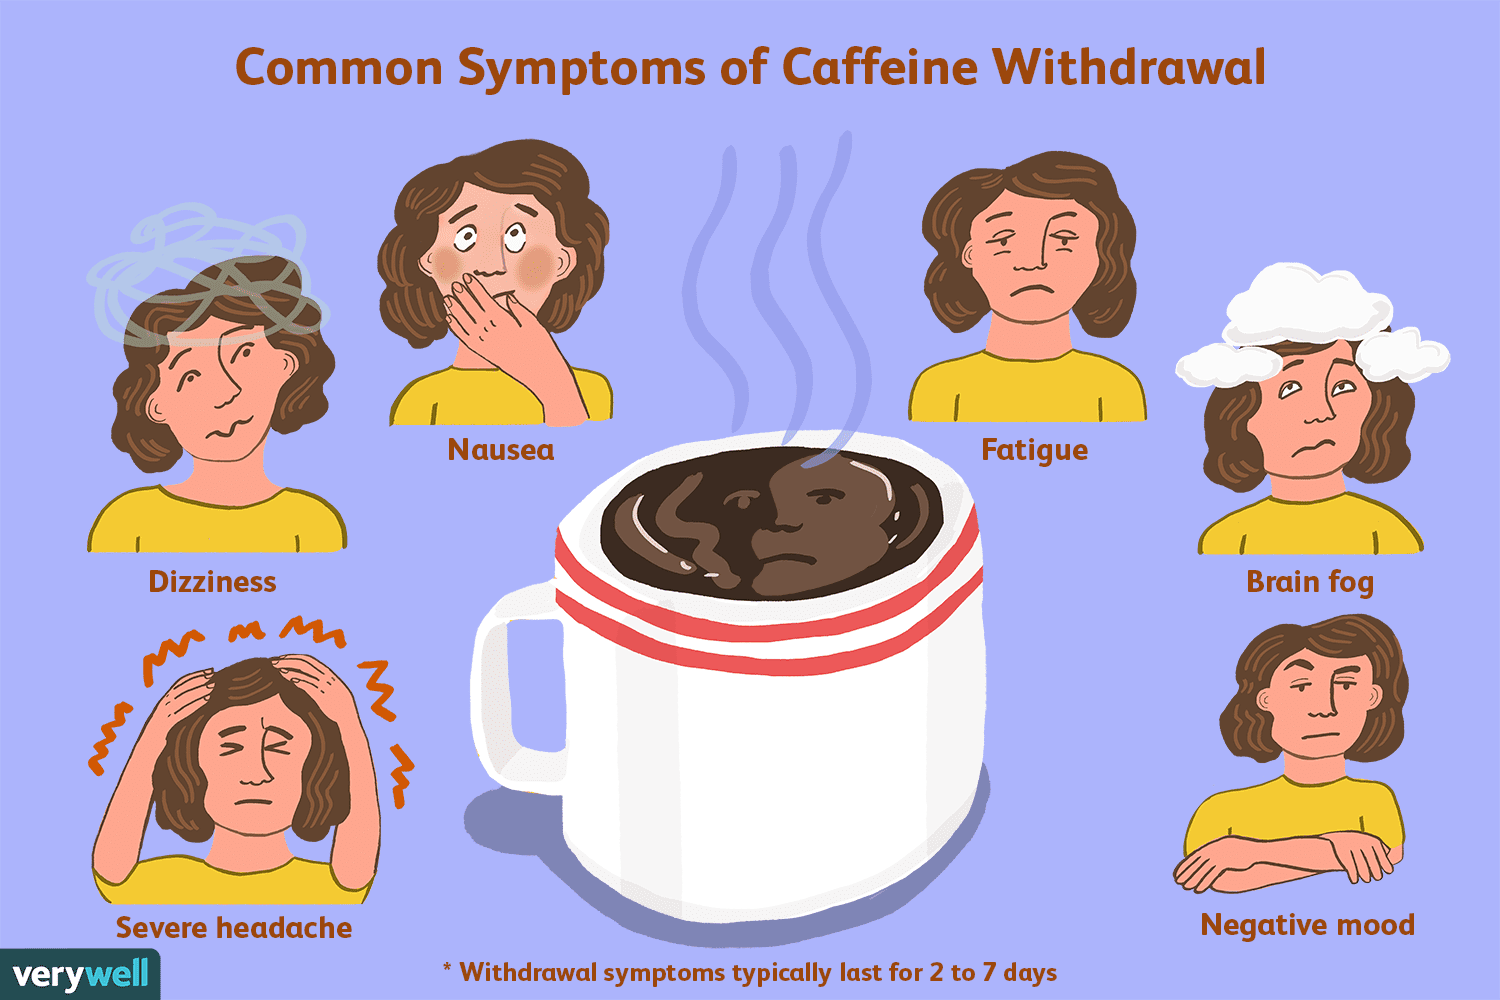 Can Caffeine Withdrawal Cause Chest Pain?